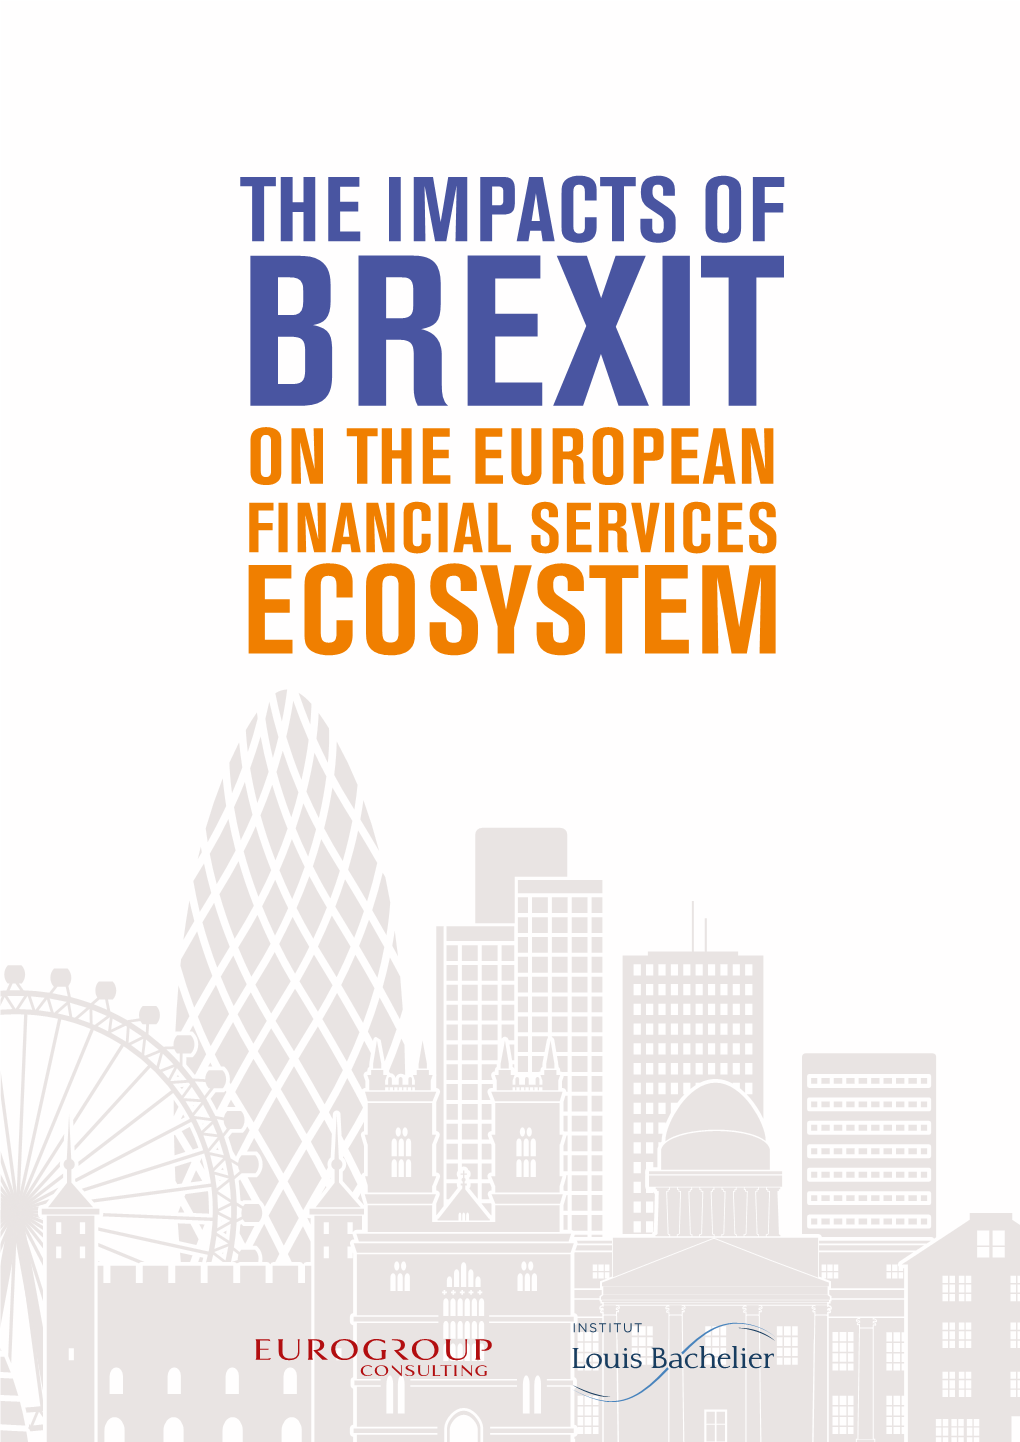 The Impacts of Brexit on the European Financial Services Ecosystem